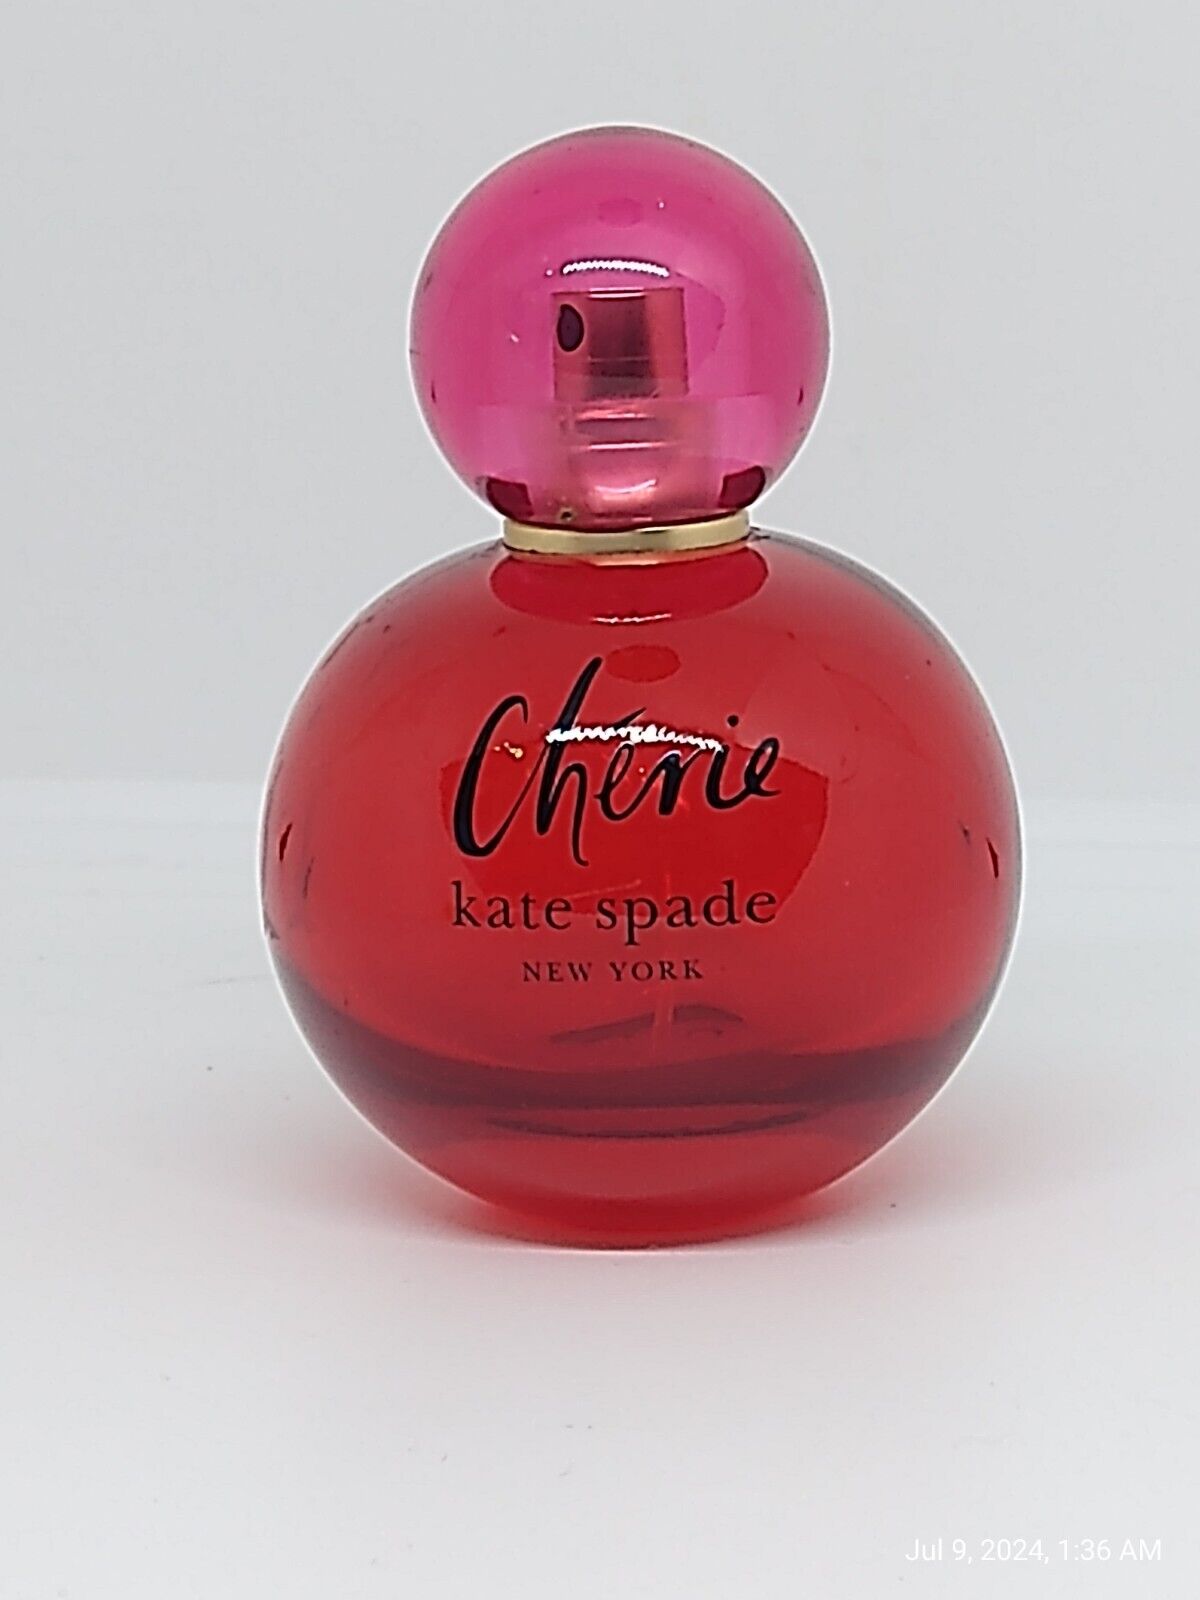 Empty Kate Spade CHERIE Perfume Bottle 3.3 oz./100ml - For Crafts / Repurpose 